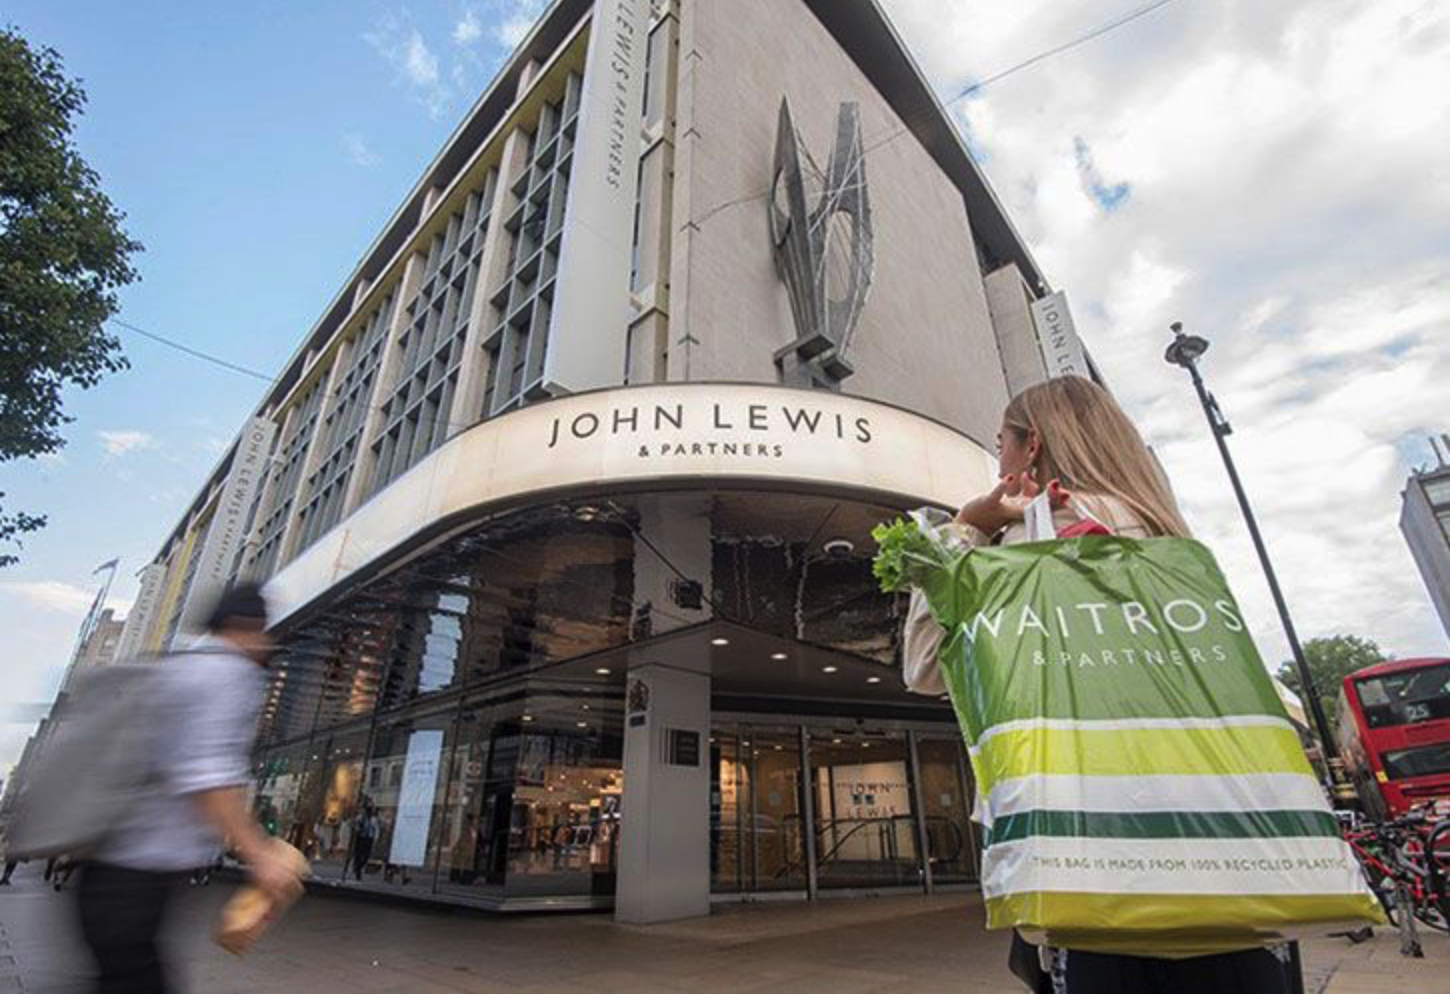 John Lewis reveals 23% decline in profits and plans to resize store estate